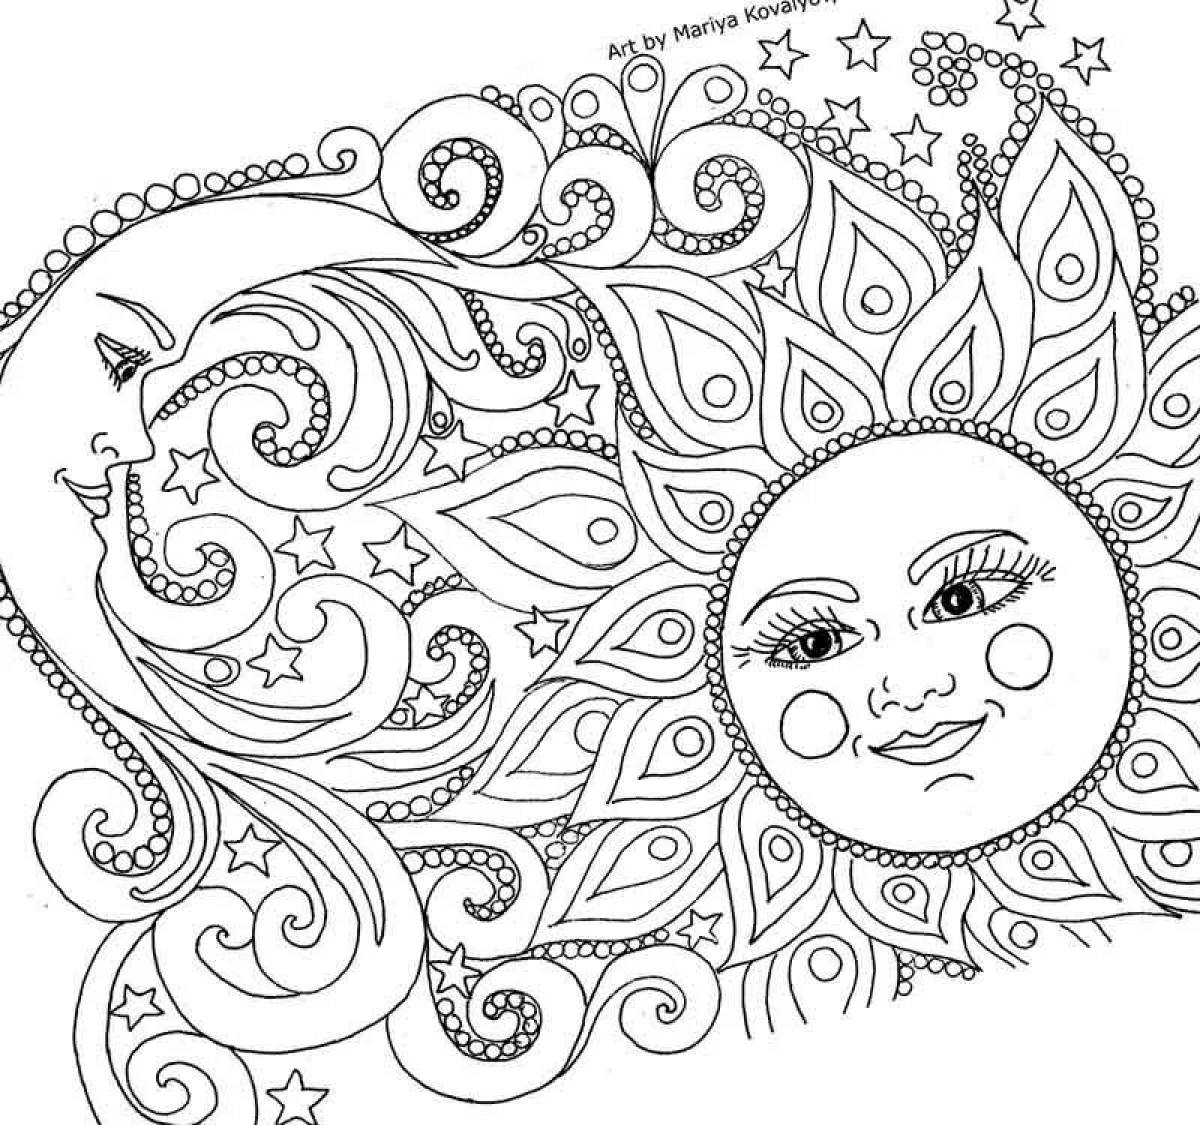 Nervous coloring book